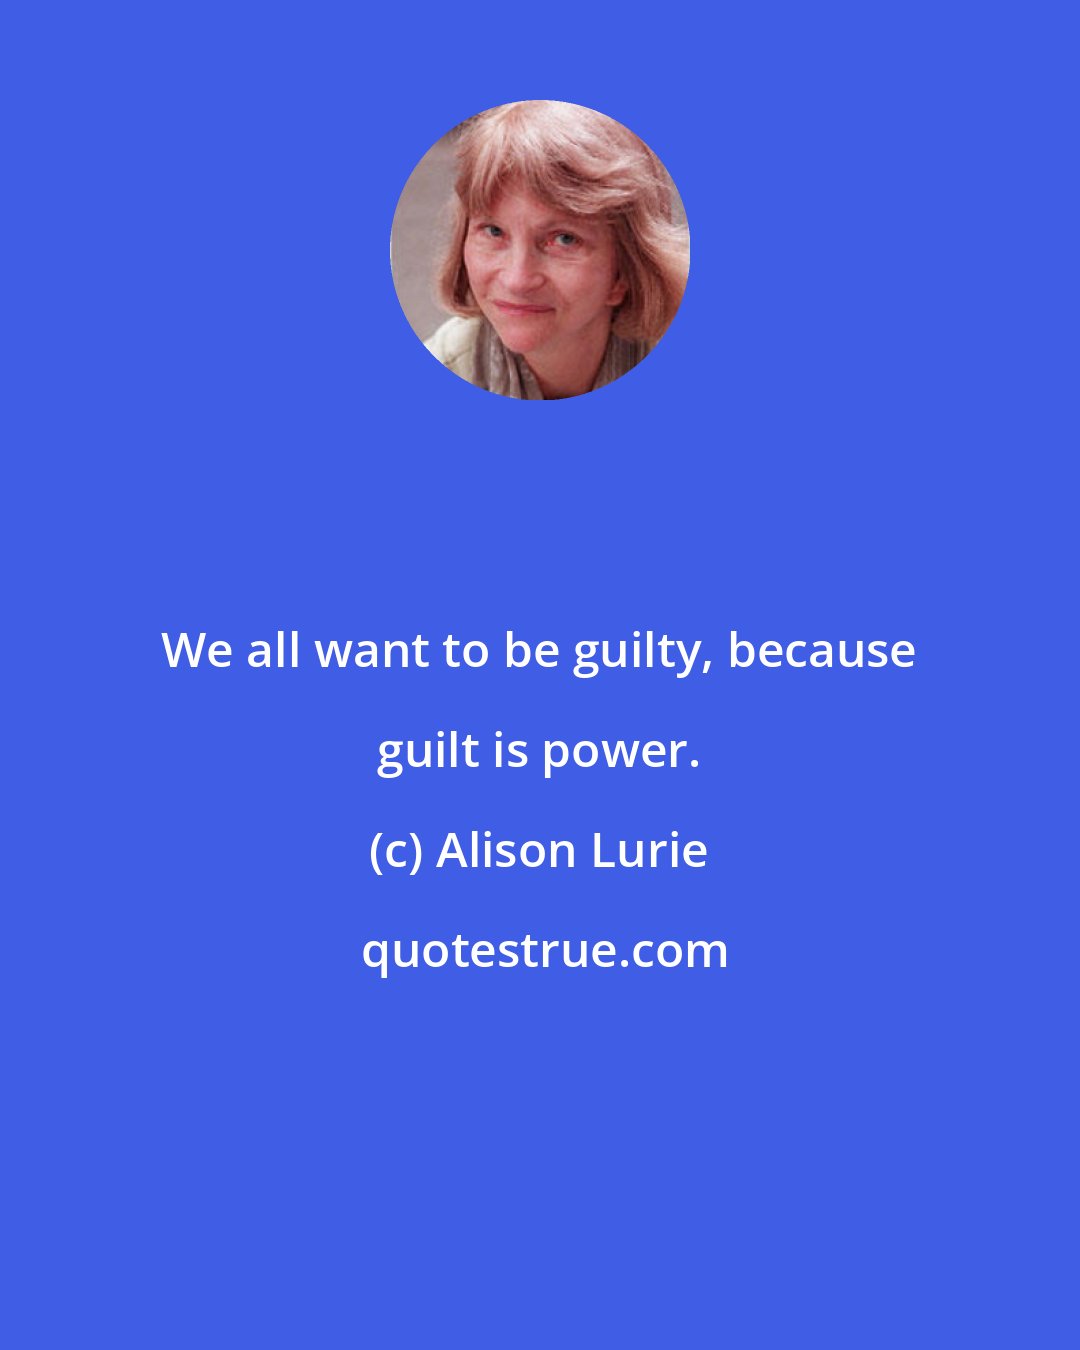 Alison Lurie: We all want to be guilty, because guilt is power.